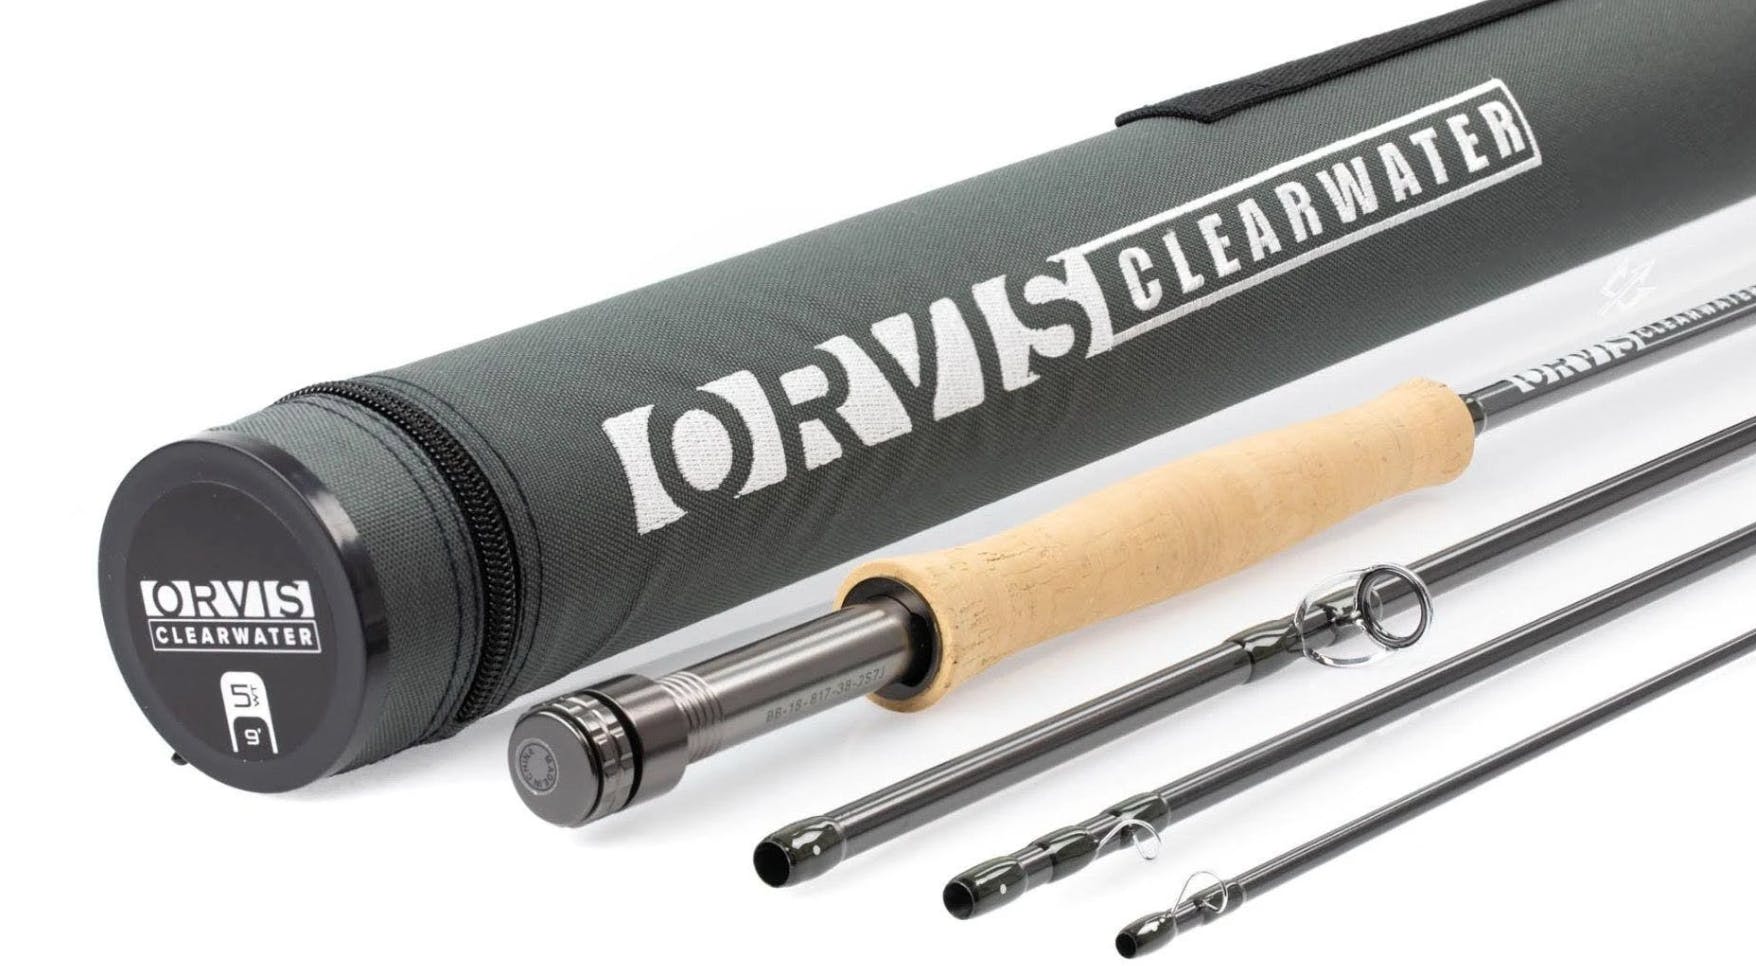 The Orvis Clearwater Rod. 